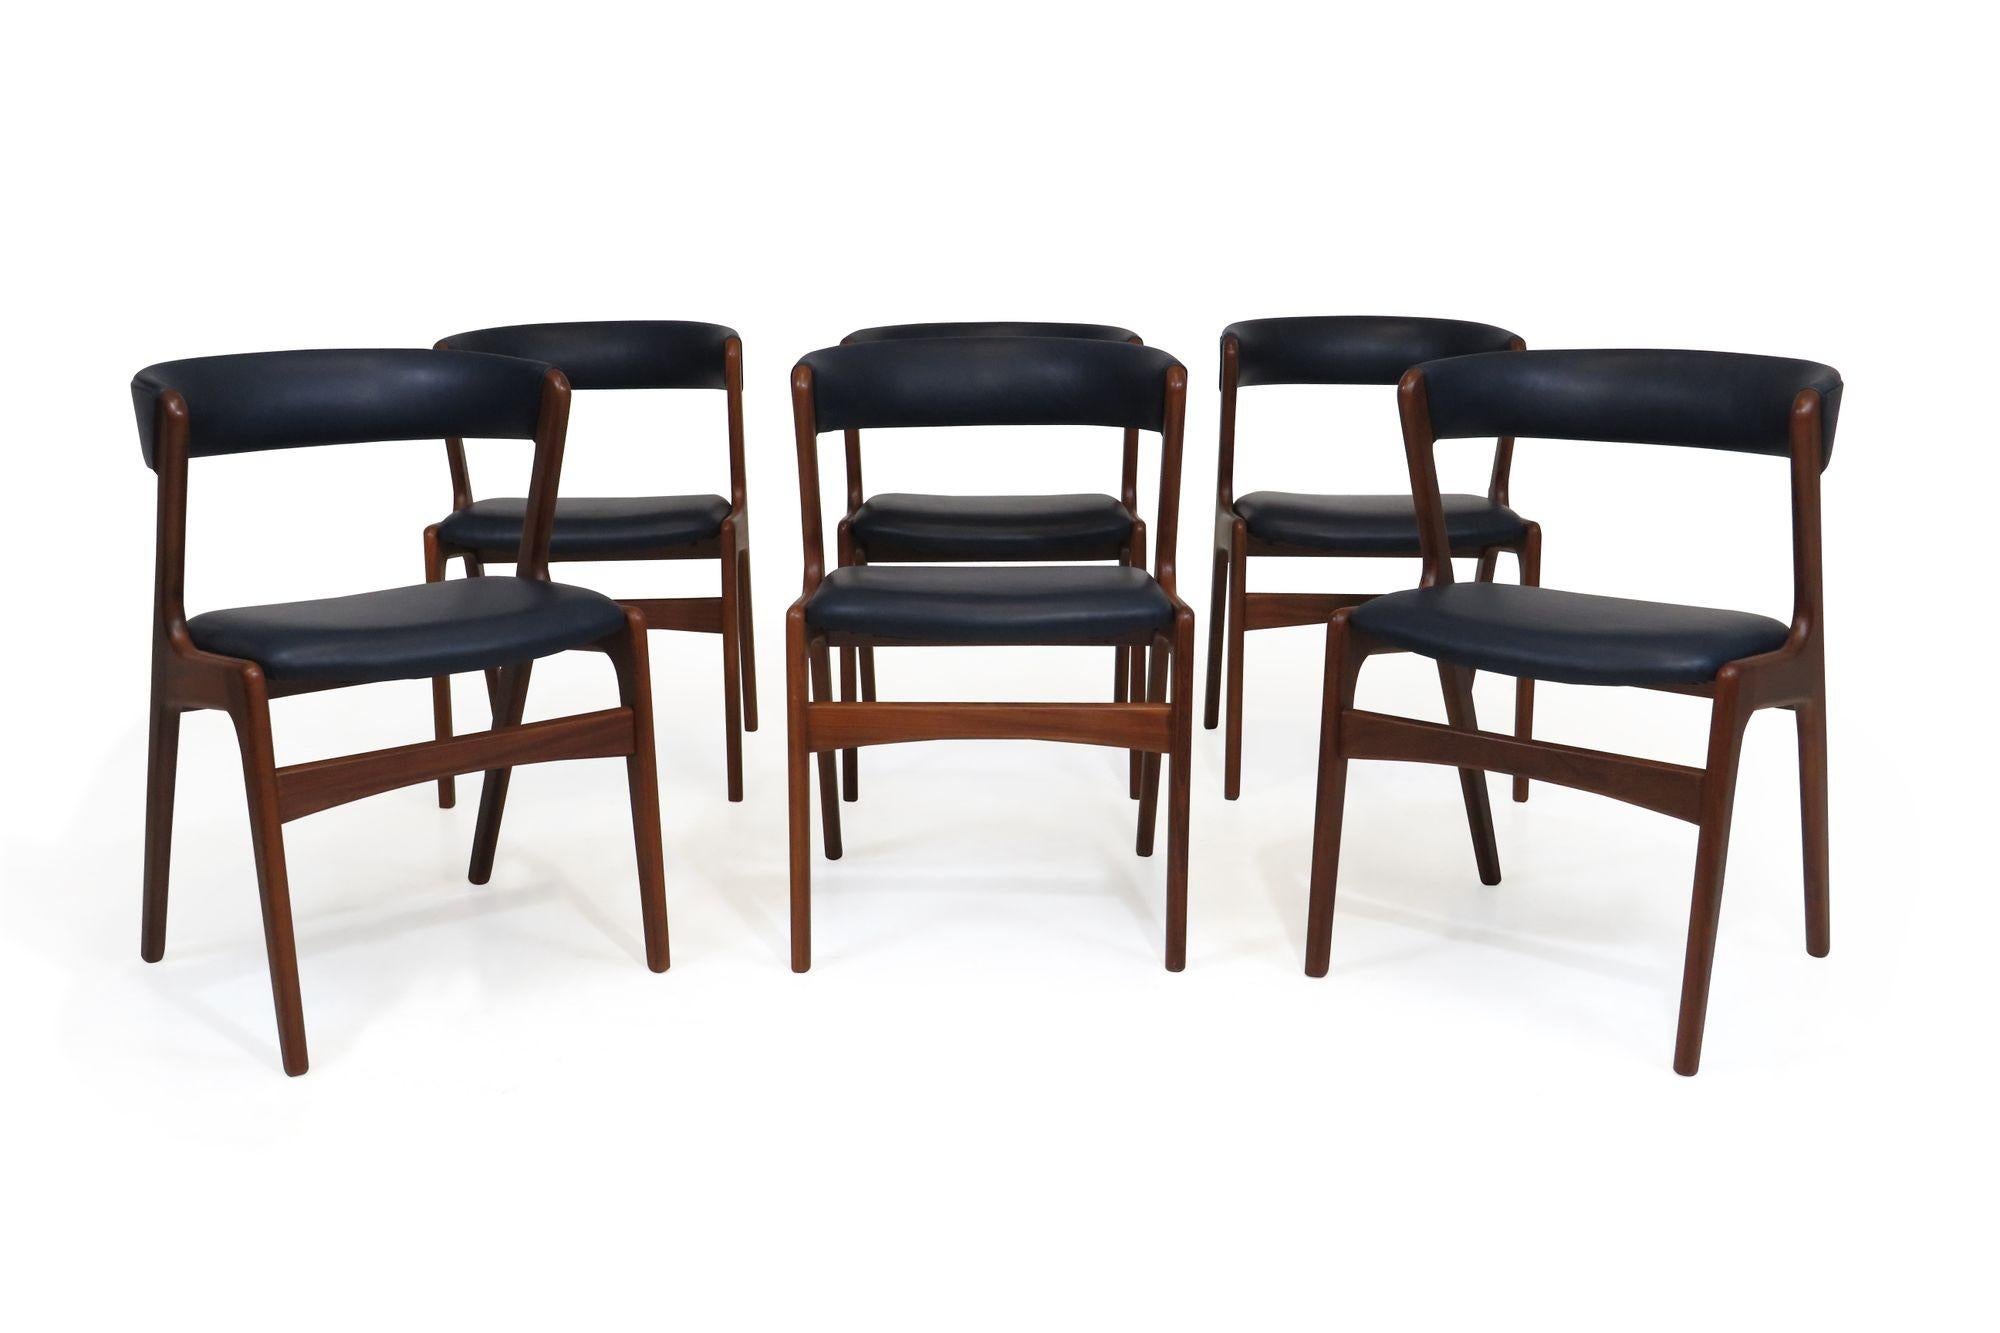 20th Century Kai Kristiansen Curved Back Dining Chairs in Navy Leather ( 80 chairs available)